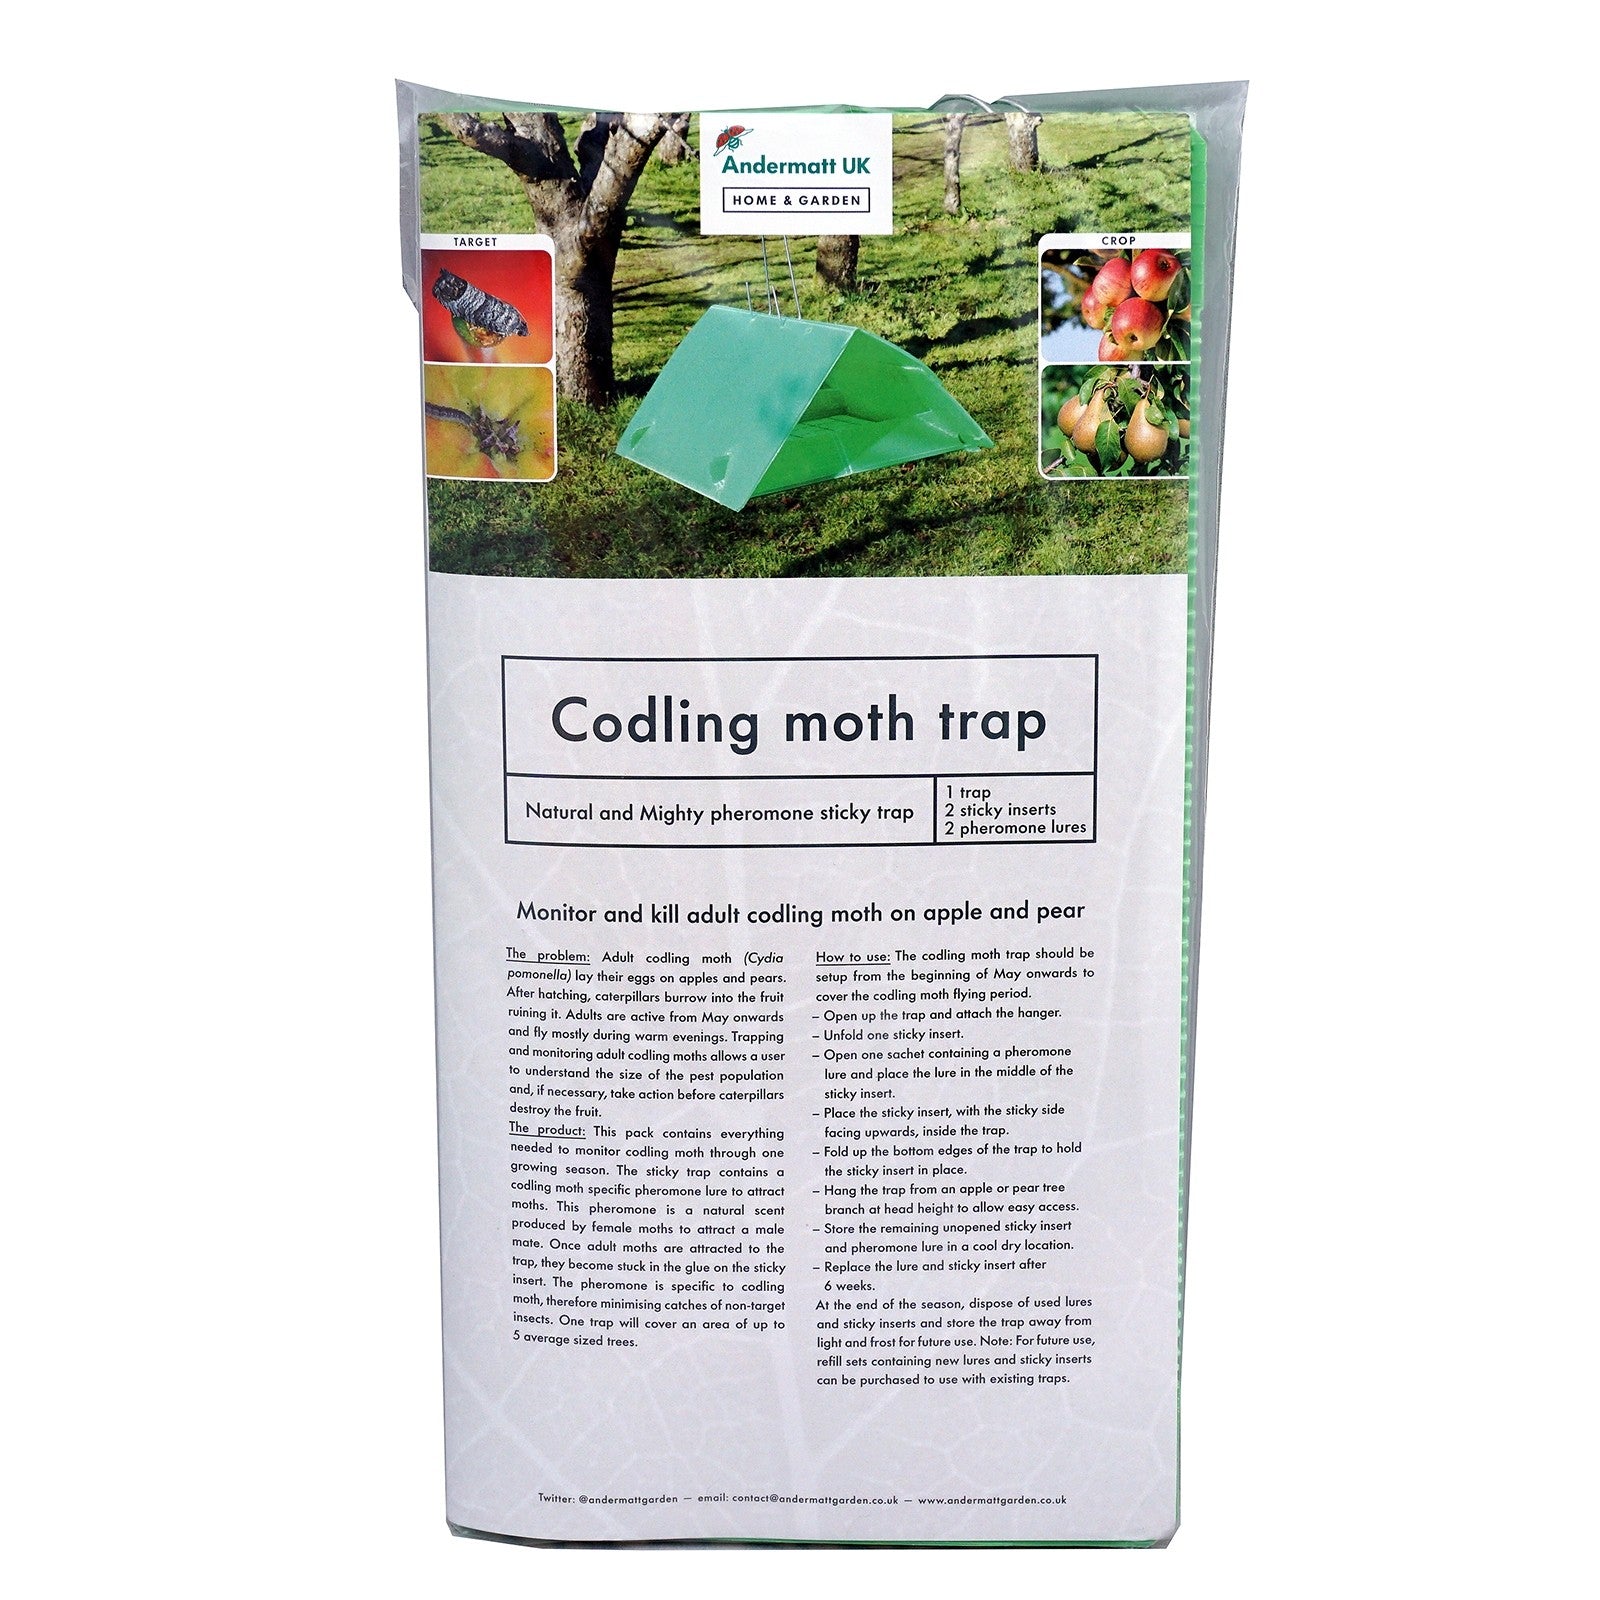 Photo of codling moth trap packaging.